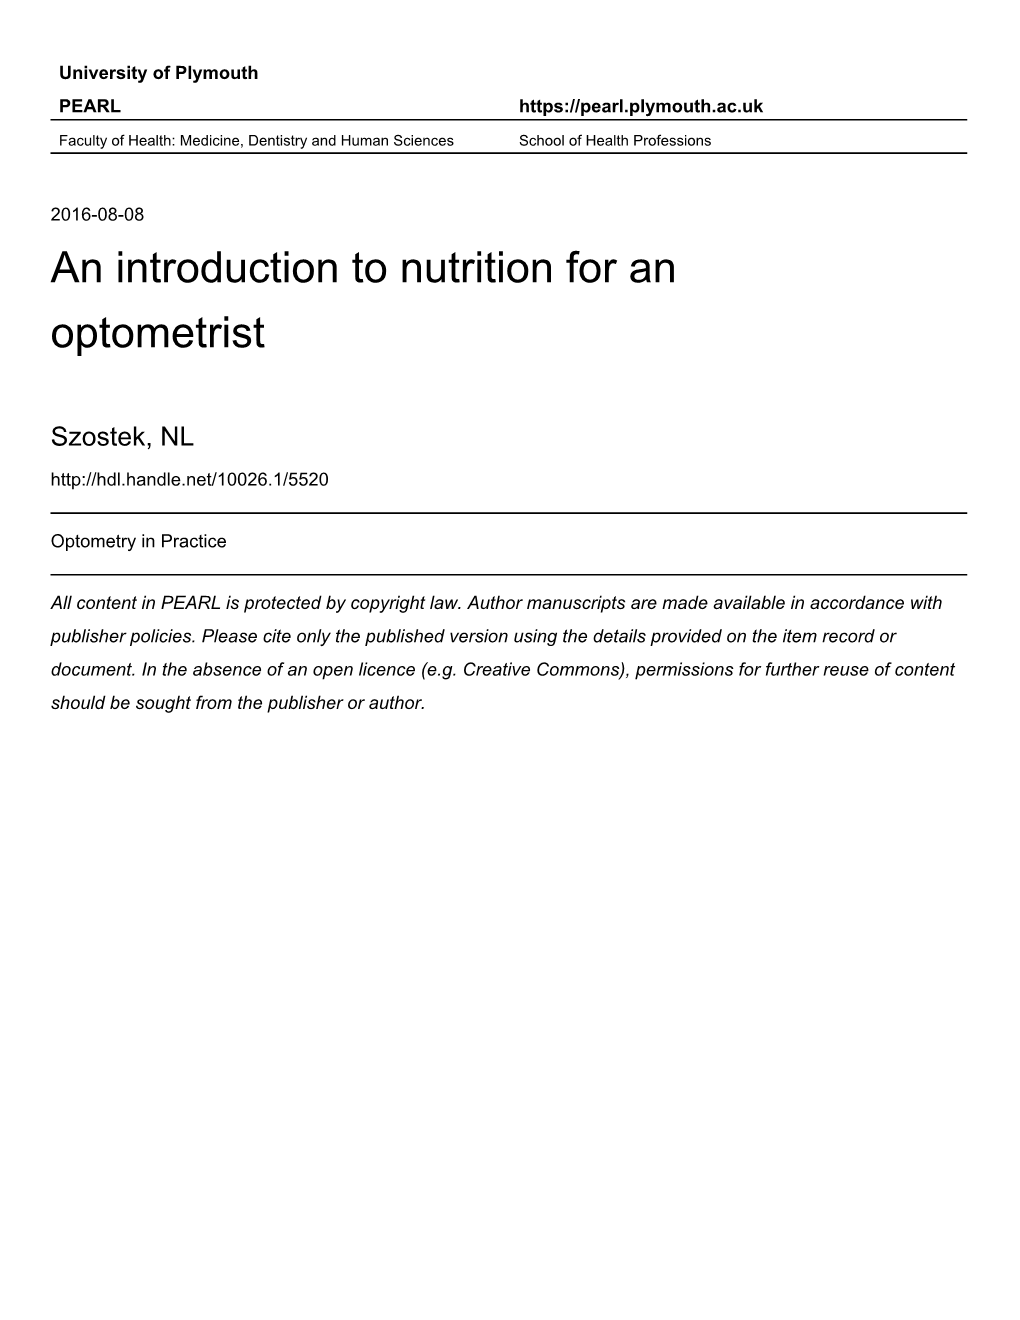 An Introduction to Nutrition for an Optometrist